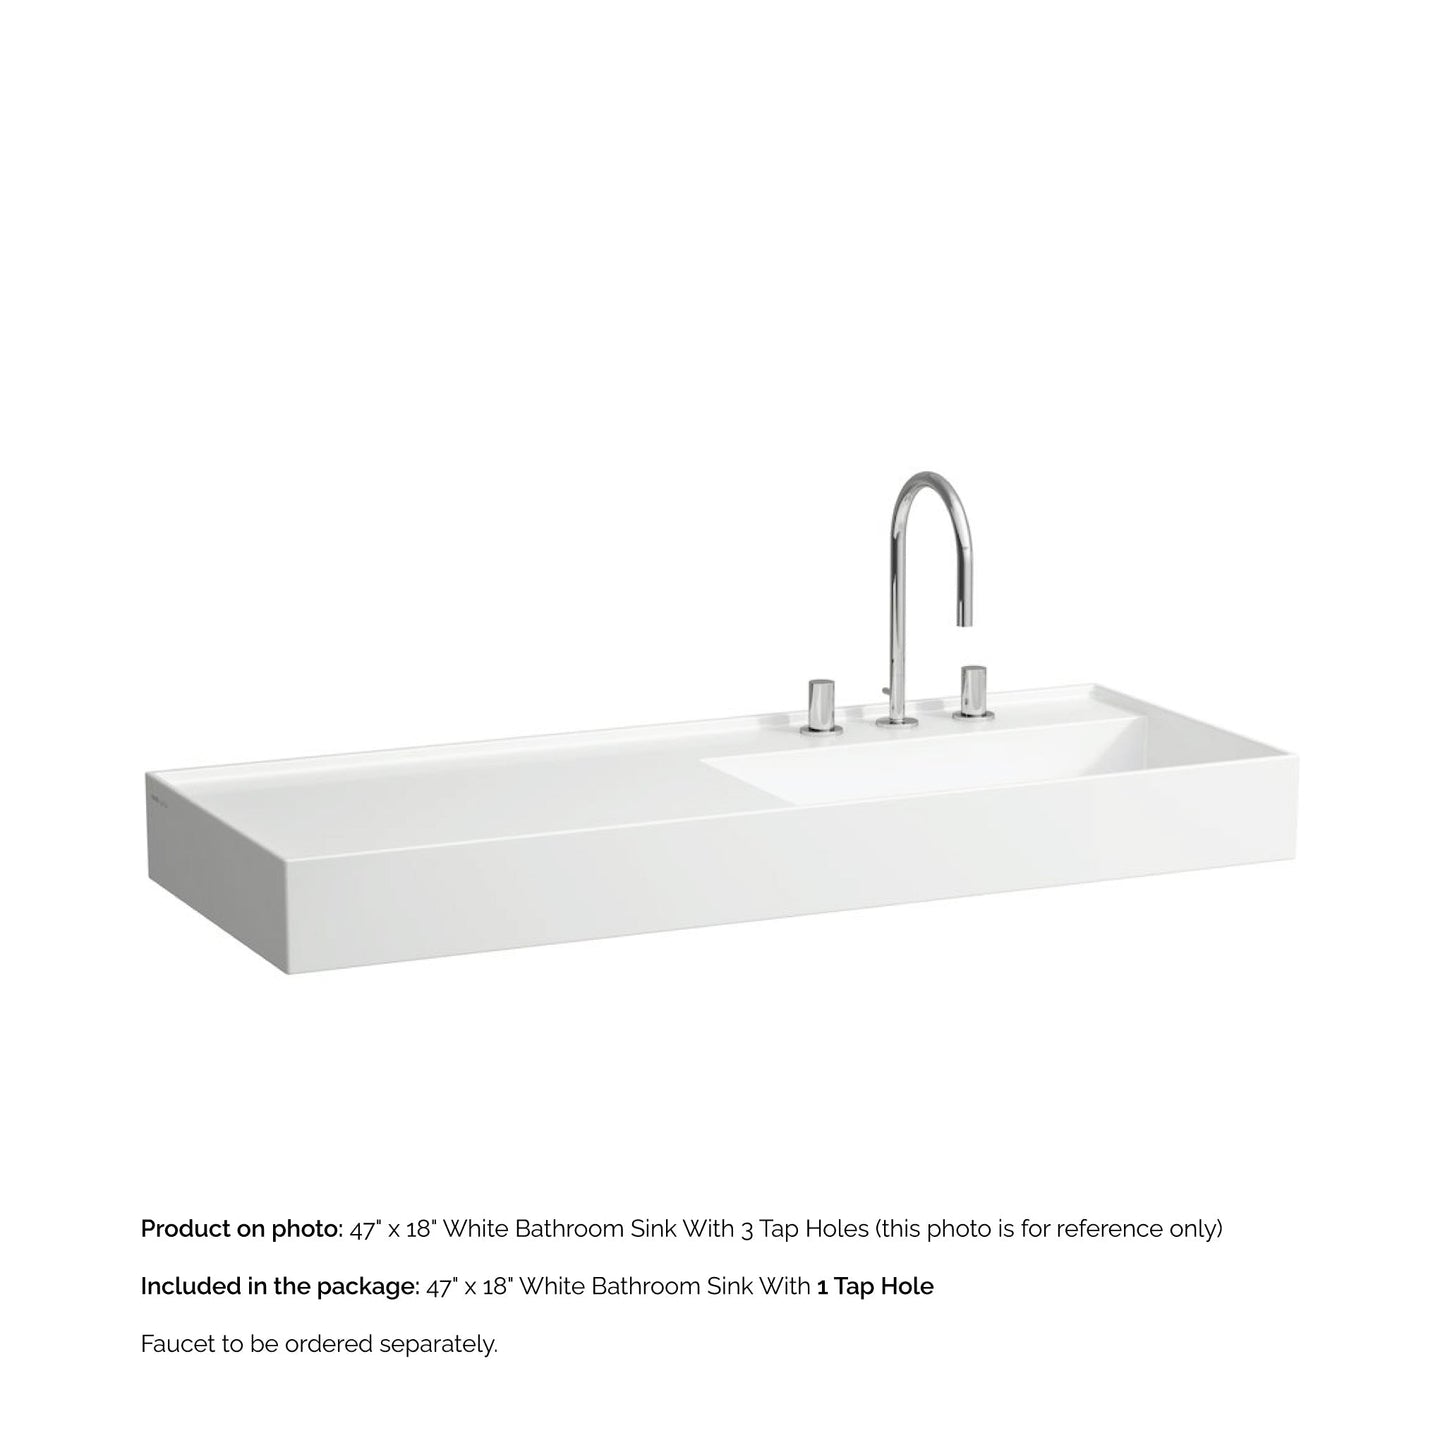 Laufen Kartell 47" x 18" White Wall-Mounted Shelf-Left Bathroom Sink With Faucet Hole